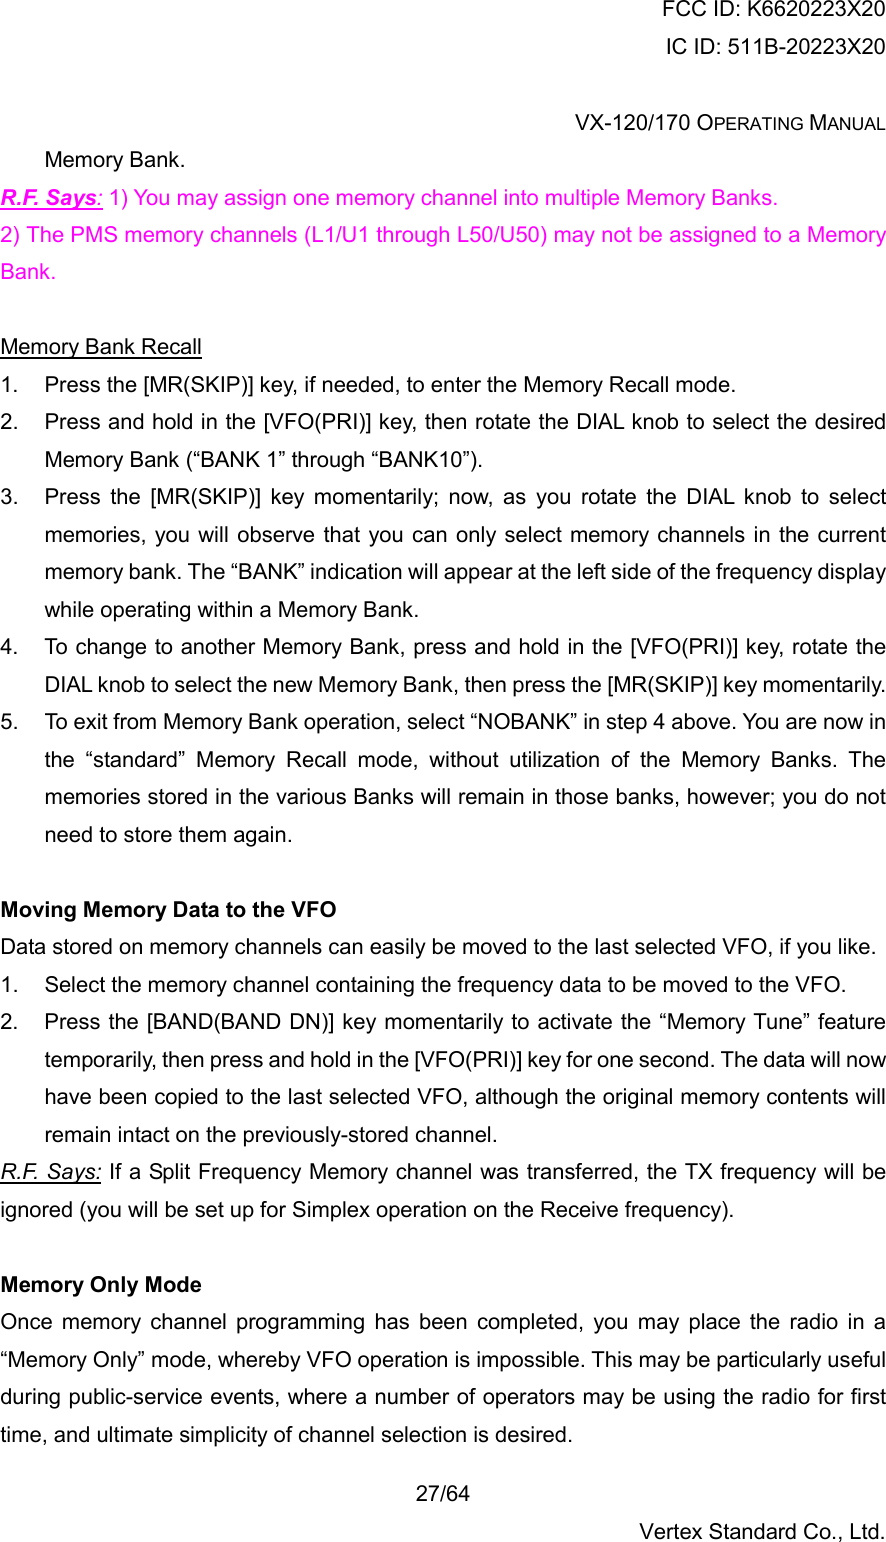 FCC ID: K6620223X20 IC ID: 511B-20223X20  VX-120/170 OPERATING MANUAL    27/64 Vertex Standard Co., Ltd. Memory Bank. R.F. Says: 1) You may assign one memory channel into multiple Memory Banks. 2) The PMS memory channels (L1/U1 through L50/U50) may not be assigned to a Memory Bank.  Memory Bank Recall 1.  Press the [MR(SKIP)] key, if needed, to enter the Memory Recall mode. 2.  Press and hold in the [VFO(PRI)] key, then rotate the DIAL knob to select the desired Memory Bank (“BANK 1” through “BANK10”). 3.  Press the [MR(SKIP)] key momentarily; now, as you rotate the DIAL knob to select memories, you will observe that you can only select memory channels in the current memory bank. The “BANK” indication will appear at the left side of the frequency display while operating within a Memory Bank. 4.  To change to another Memory Bank, press and hold in the [VFO(PRI)] key, rotate the DIAL knob to select the new Memory Bank, then press the [MR(SKIP)] key momentarily. 5.  To exit from Memory Bank operation, select “NOBANK” in step 4 above. You are now in the “standard” Memory Recall mode, without utilization of the Memory Banks. The memories stored in the various Banks will remain in those banks, however; you do not need to store them again.  Moving Memory Data to the VFO Data stored on memory channels can easily be moved to the last selected VFO, if you like. 1.  Select the memory channel containing the frequency data to be moved to the VFO. 2.  Press the [BAND(BAND DN)] key momentarily to activate the “Memory Tune” feature temporarily, then press and hold in the [VFO(PRI)] key for one second. The data will now have been copied to the last selected VFO, although the original memory contents will remain intact on the previously-stored channel. R.F. Says: If a Split Frequency Memory channel was transferred, the TX frequency will be ignored (you will be set up for Simplex operation on the Receive frequency).  Memory Only Mode Once memory channel programming has been completed, you may place the radio in a “Memory Only” mode, whereby VFO operation is impossible. This may be particularly useful during public-service events, where a number of operators may be using the radio for first time, and ultimate simplicity of channel selection is desired. 